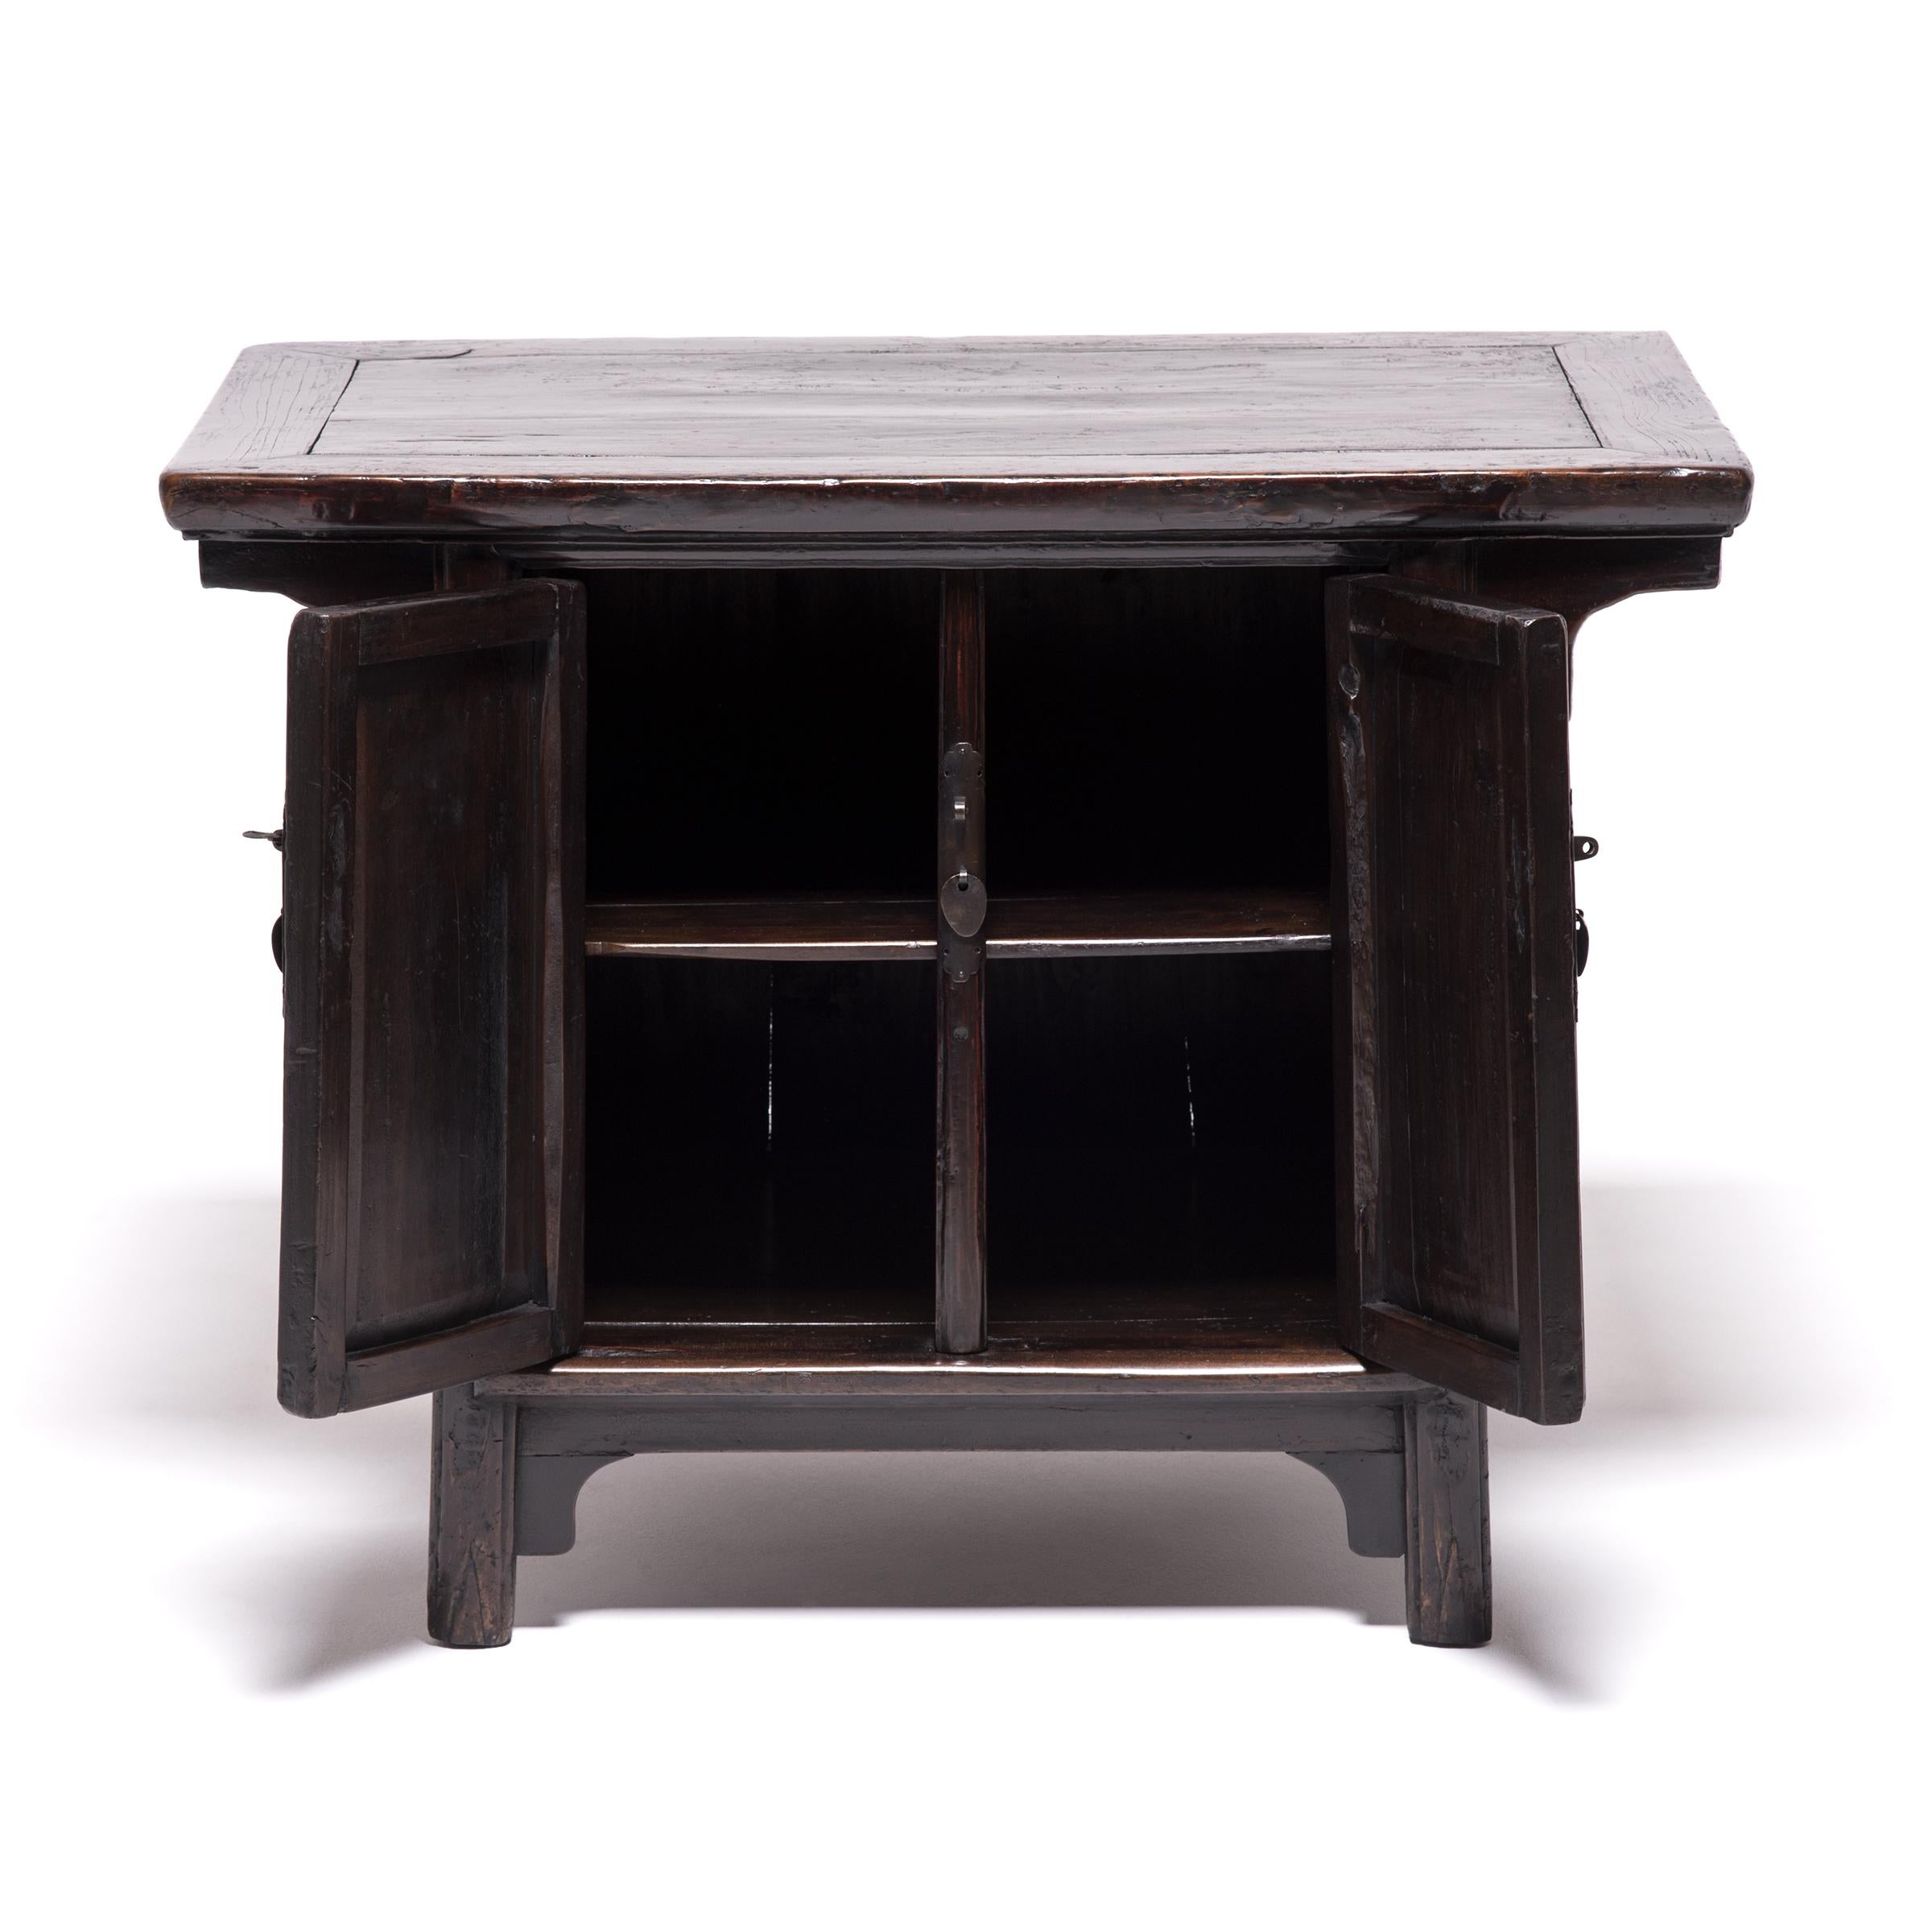 Perfectly proportioned for its petite size, this elmwood chest supports a table top with curving spandrels - echoed in the gentle curves of its apron base and rounded feet. A handcrafted brass fixture with a triple-dagger post adds to the chest’s